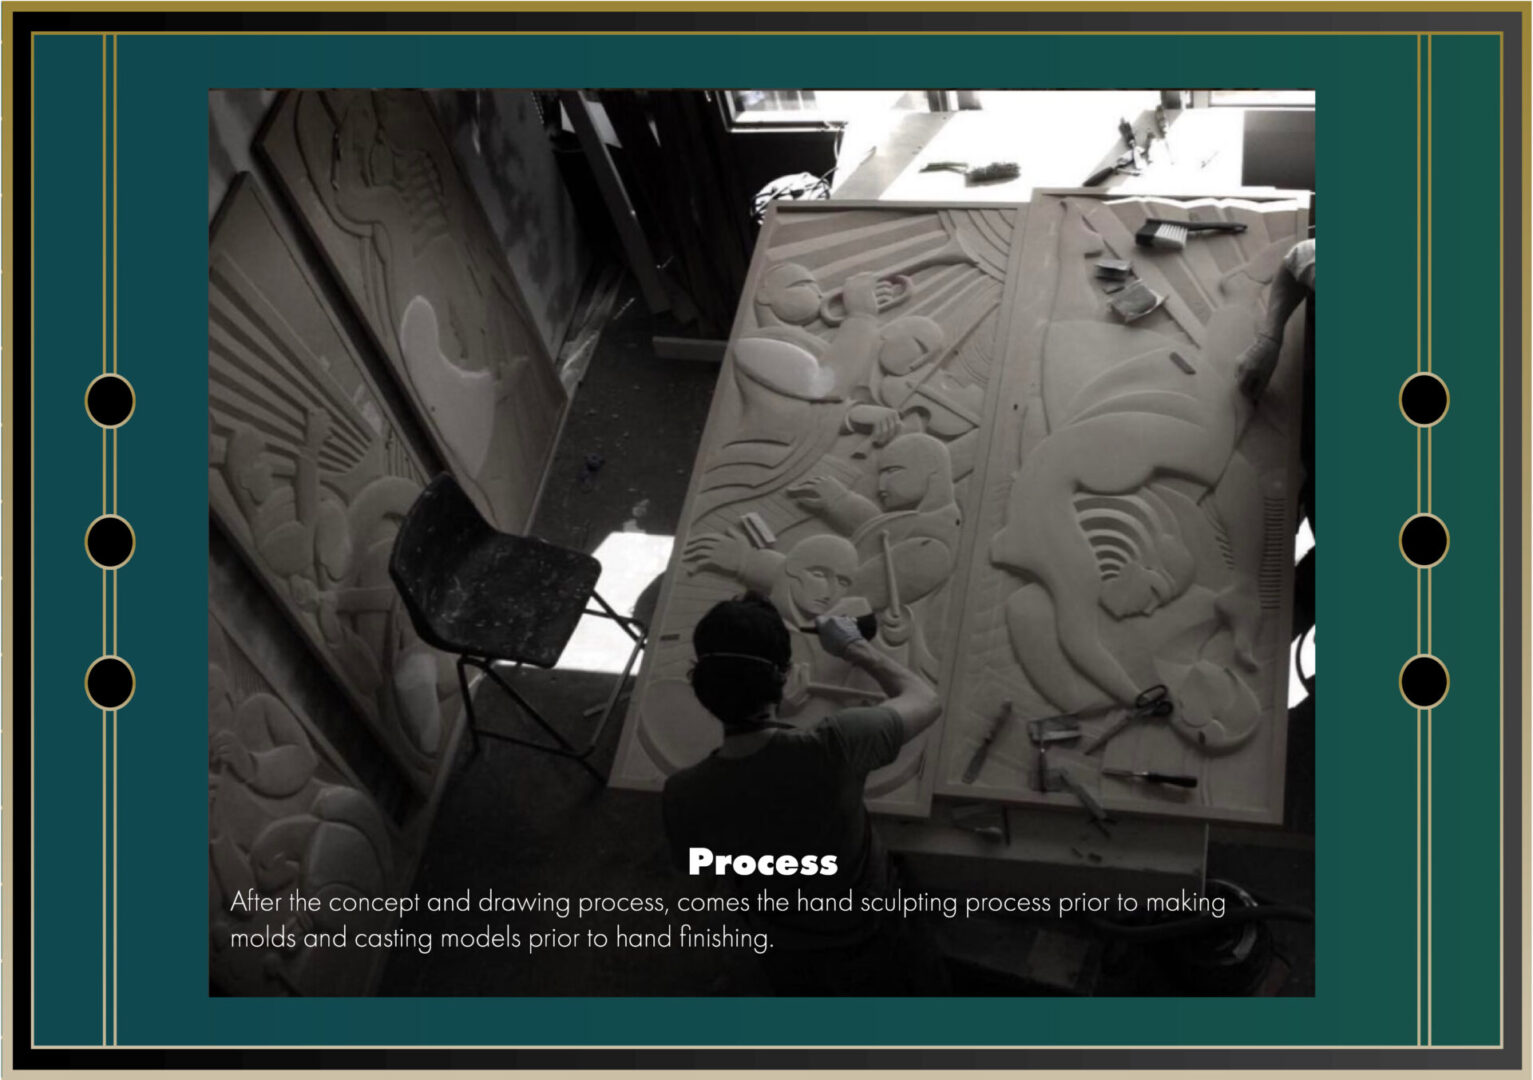 The hand sculpting process before making the molds